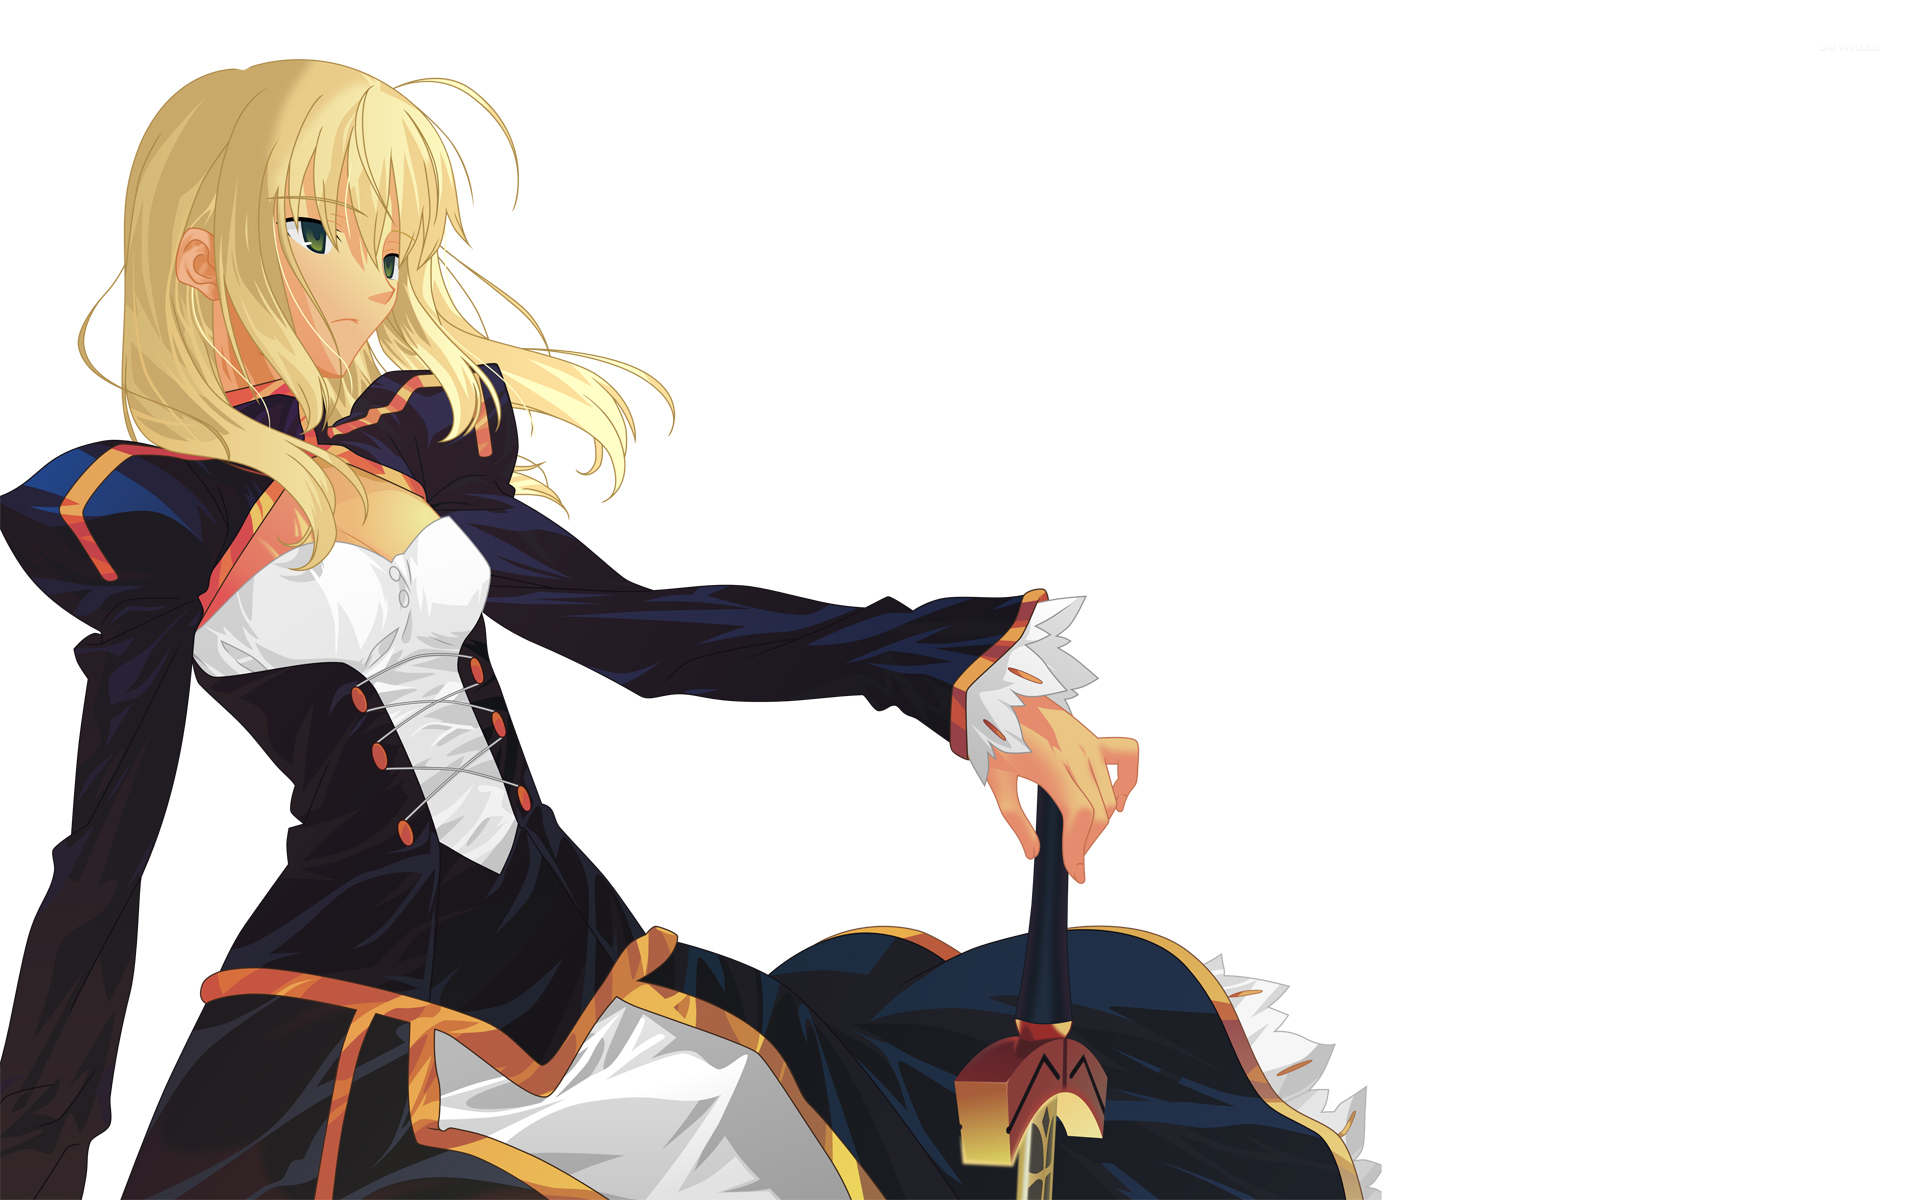 Saber Fatestay Night 4 Wallpaper Anime Wallpapers 7844